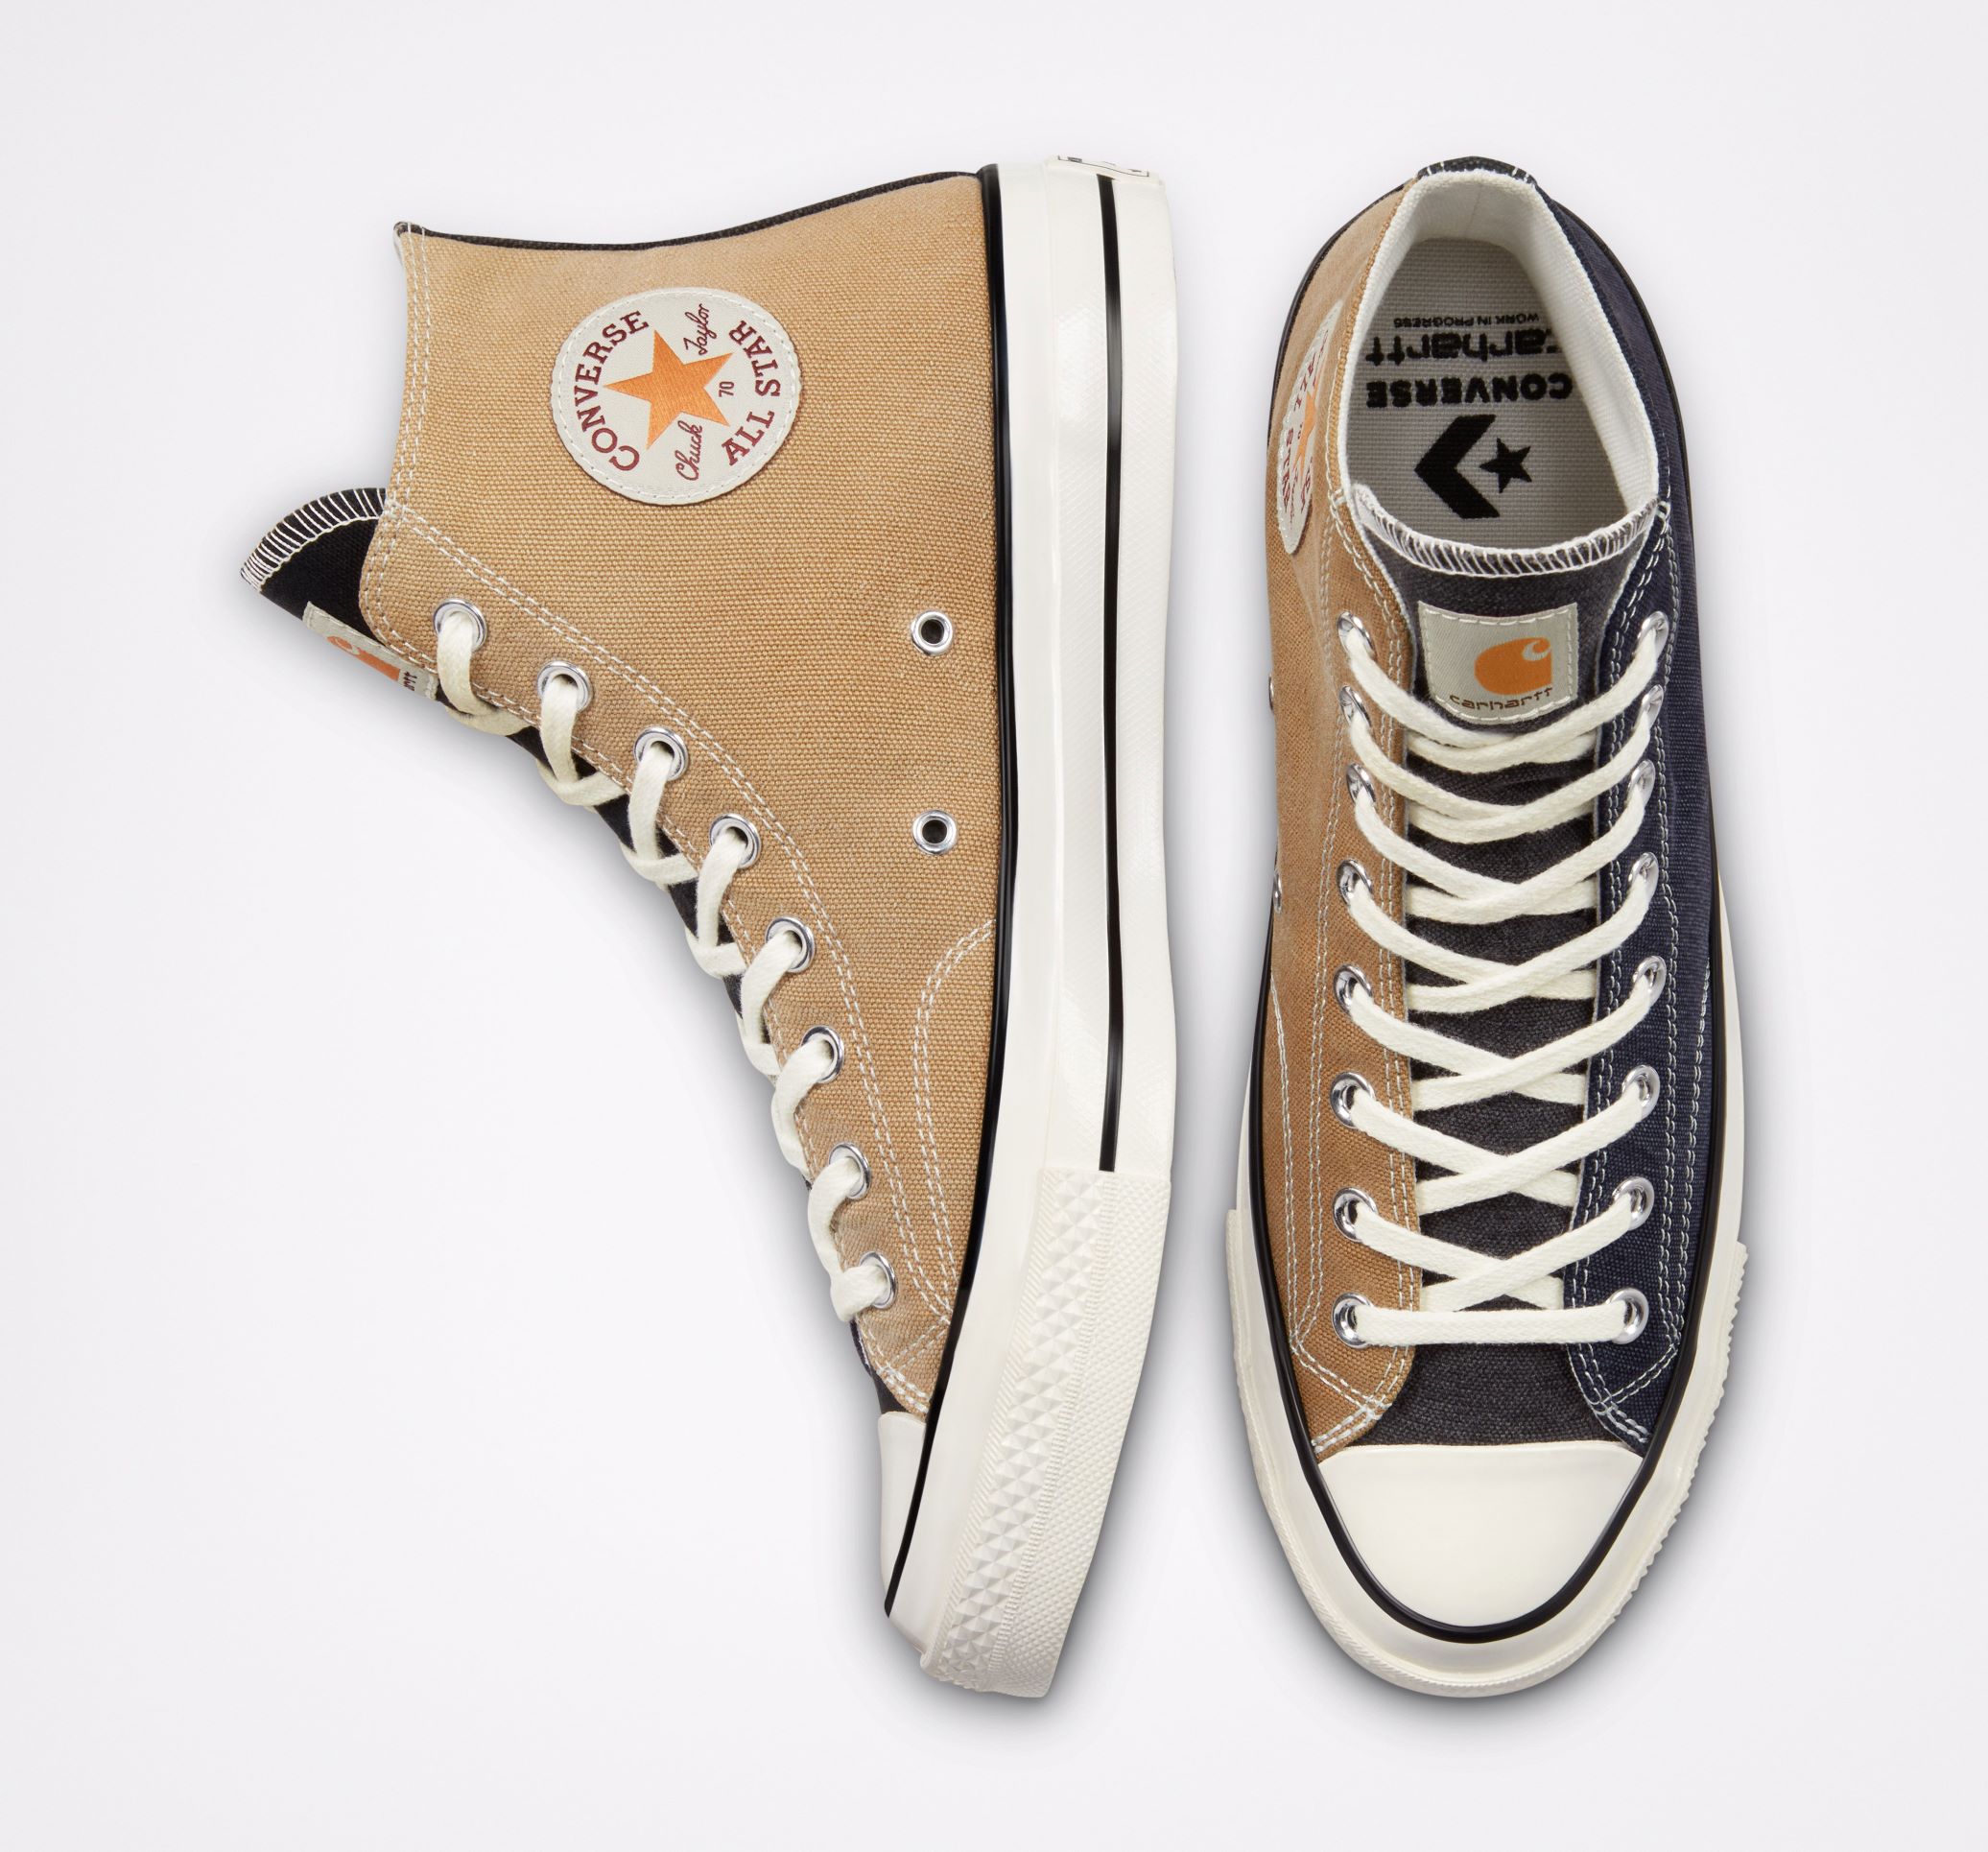 Supervisar Glamour bolsillo Converse and Carhartt WIP Debut Chuck 70 Made From Recycled Workwear - Maxim